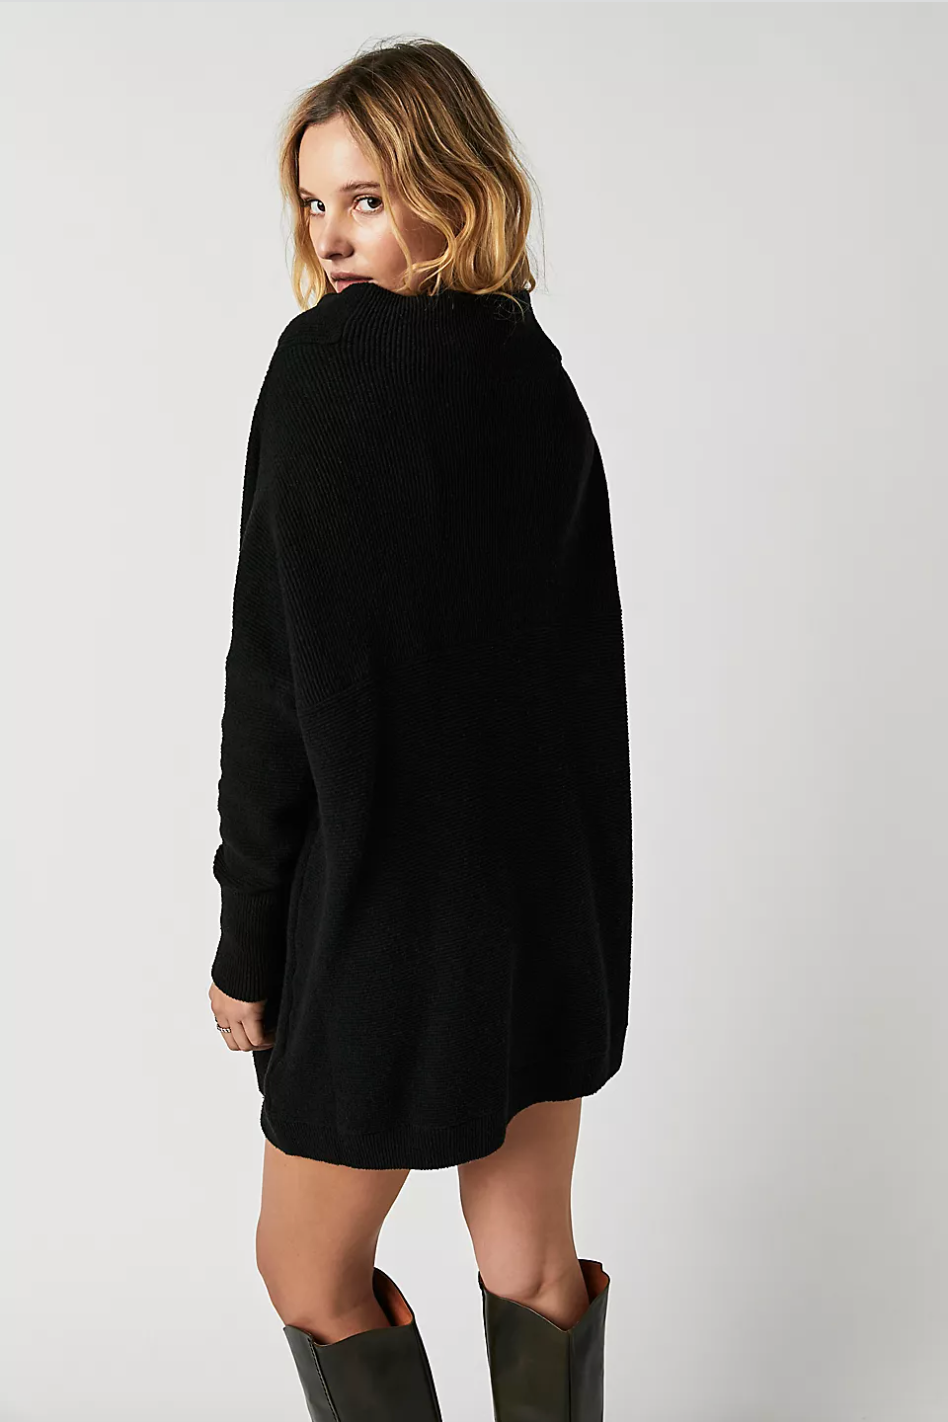 Photo of model wearing Ottoman Slouchy Tunic in the colour Black from Free People available at UniKoncept in Waterloo